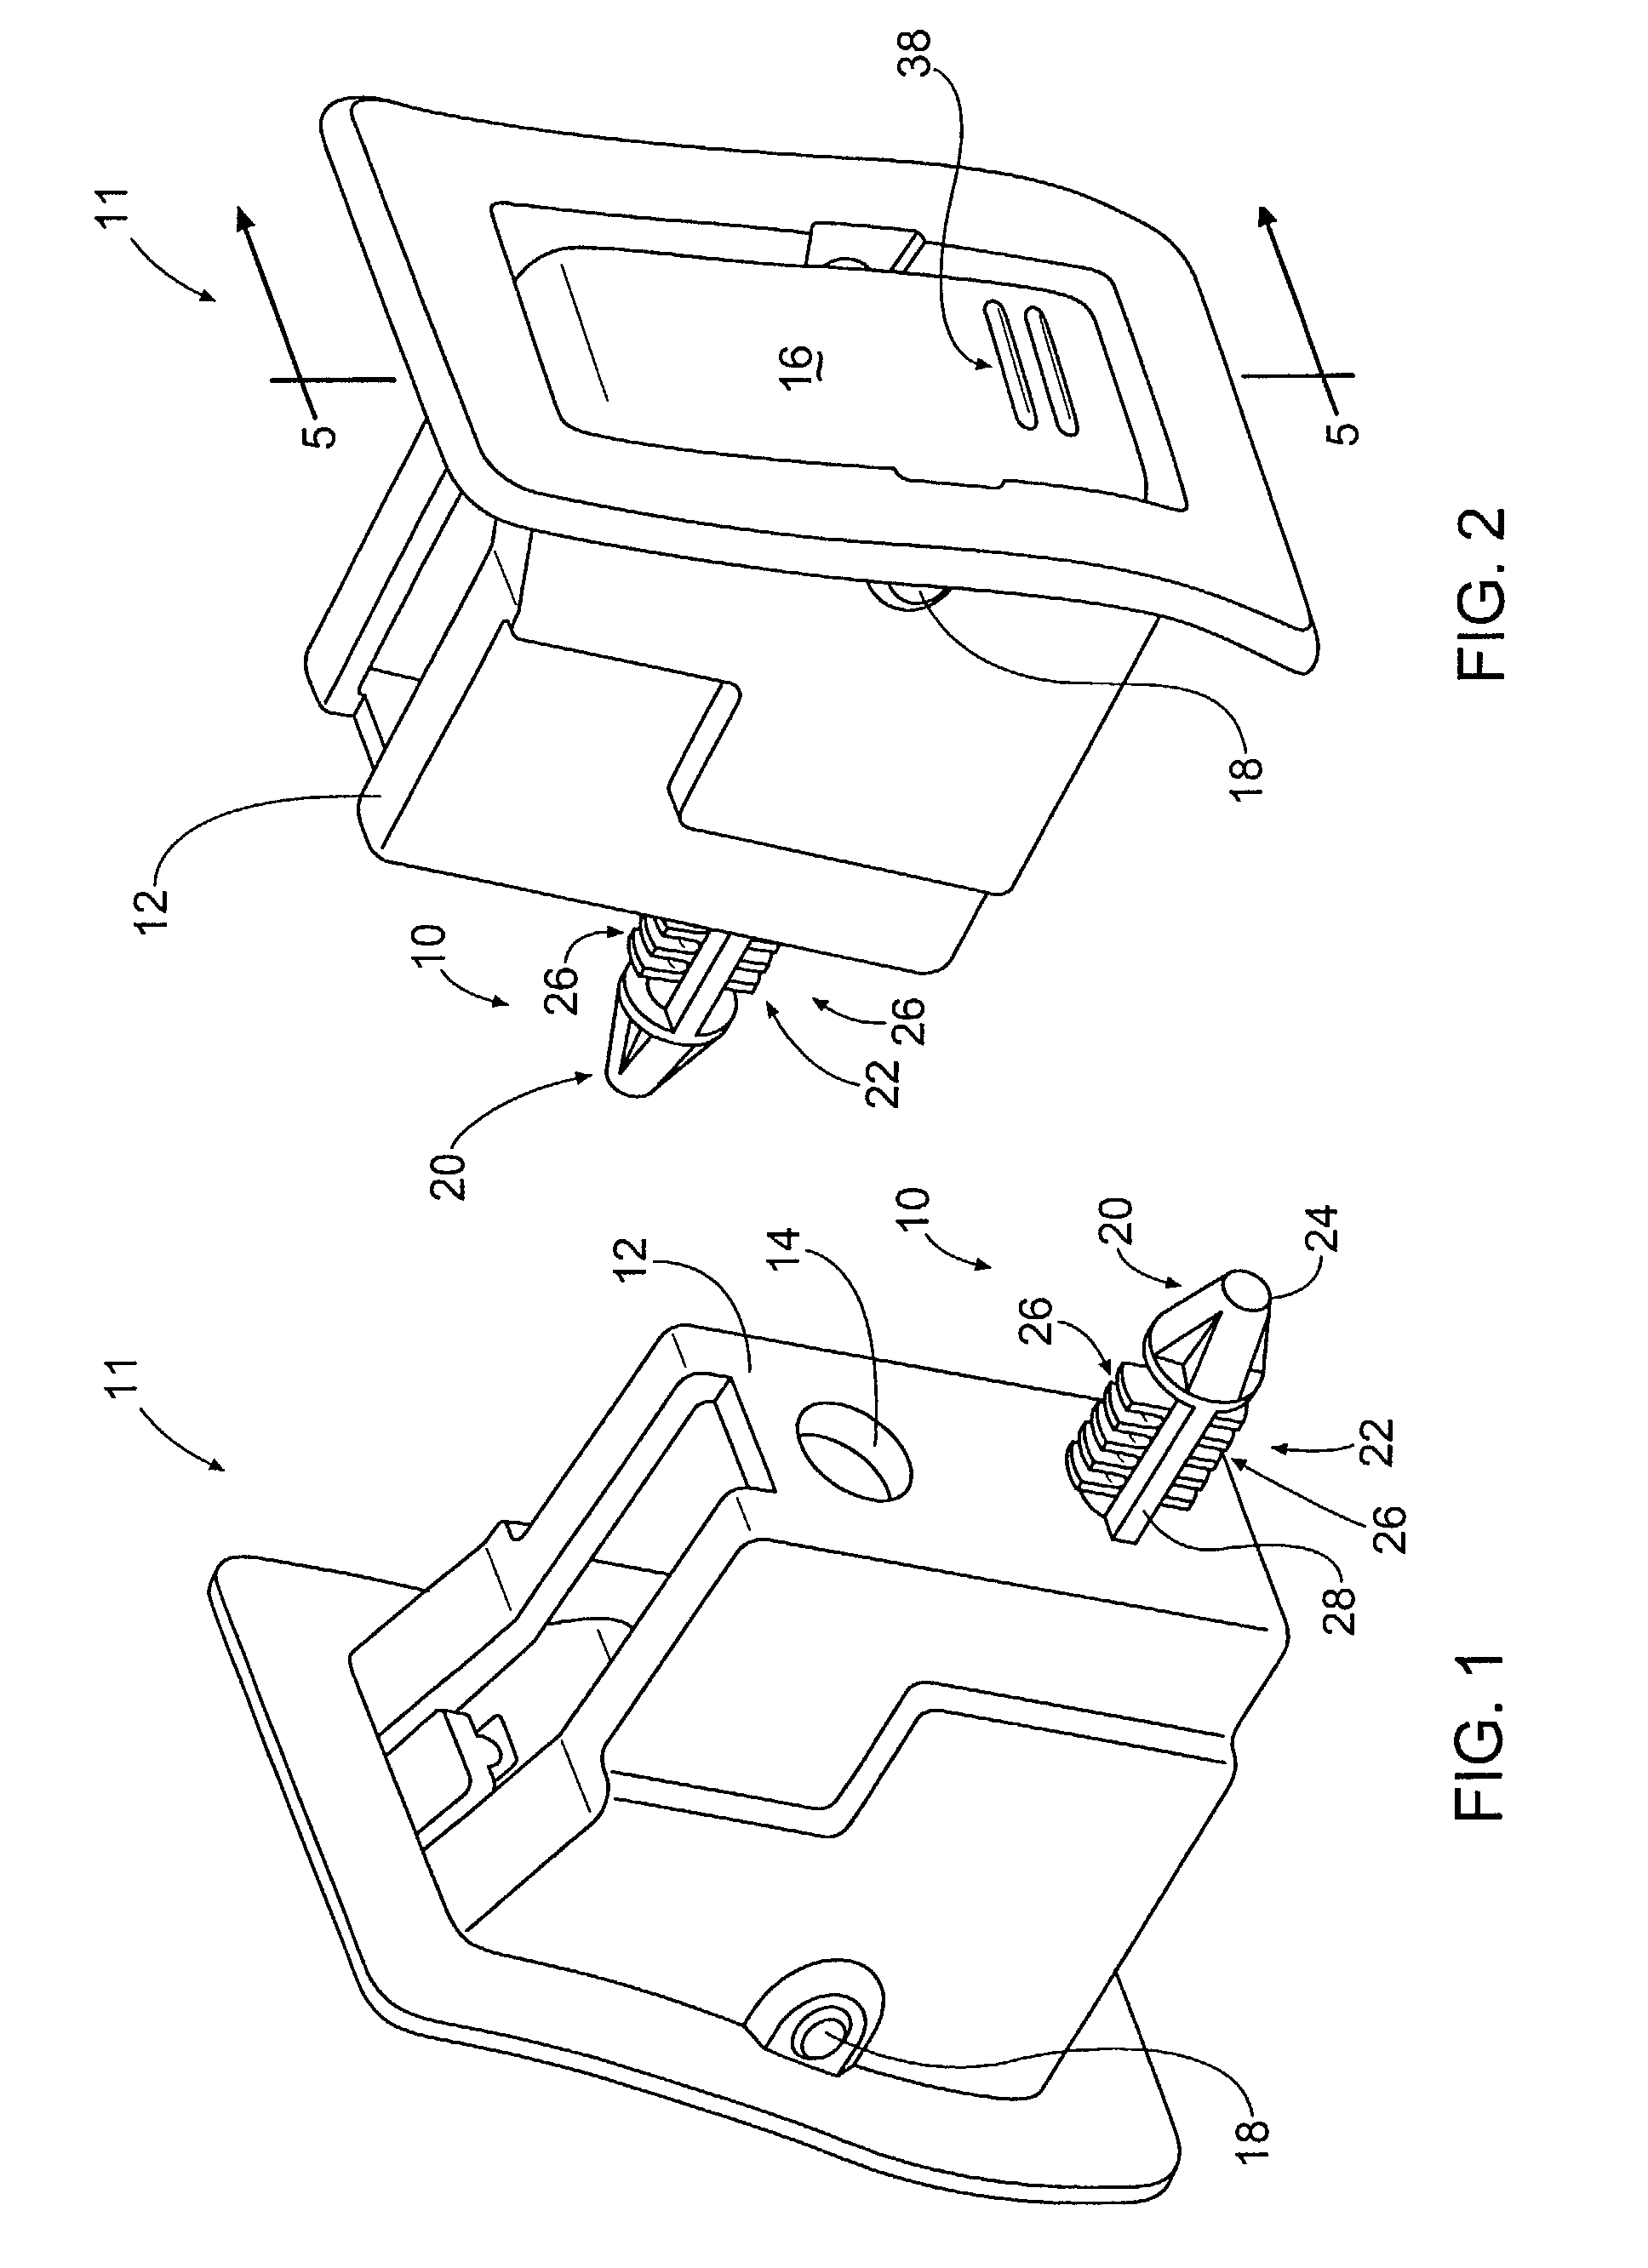 Vehicle trim component with self retaining fastening device